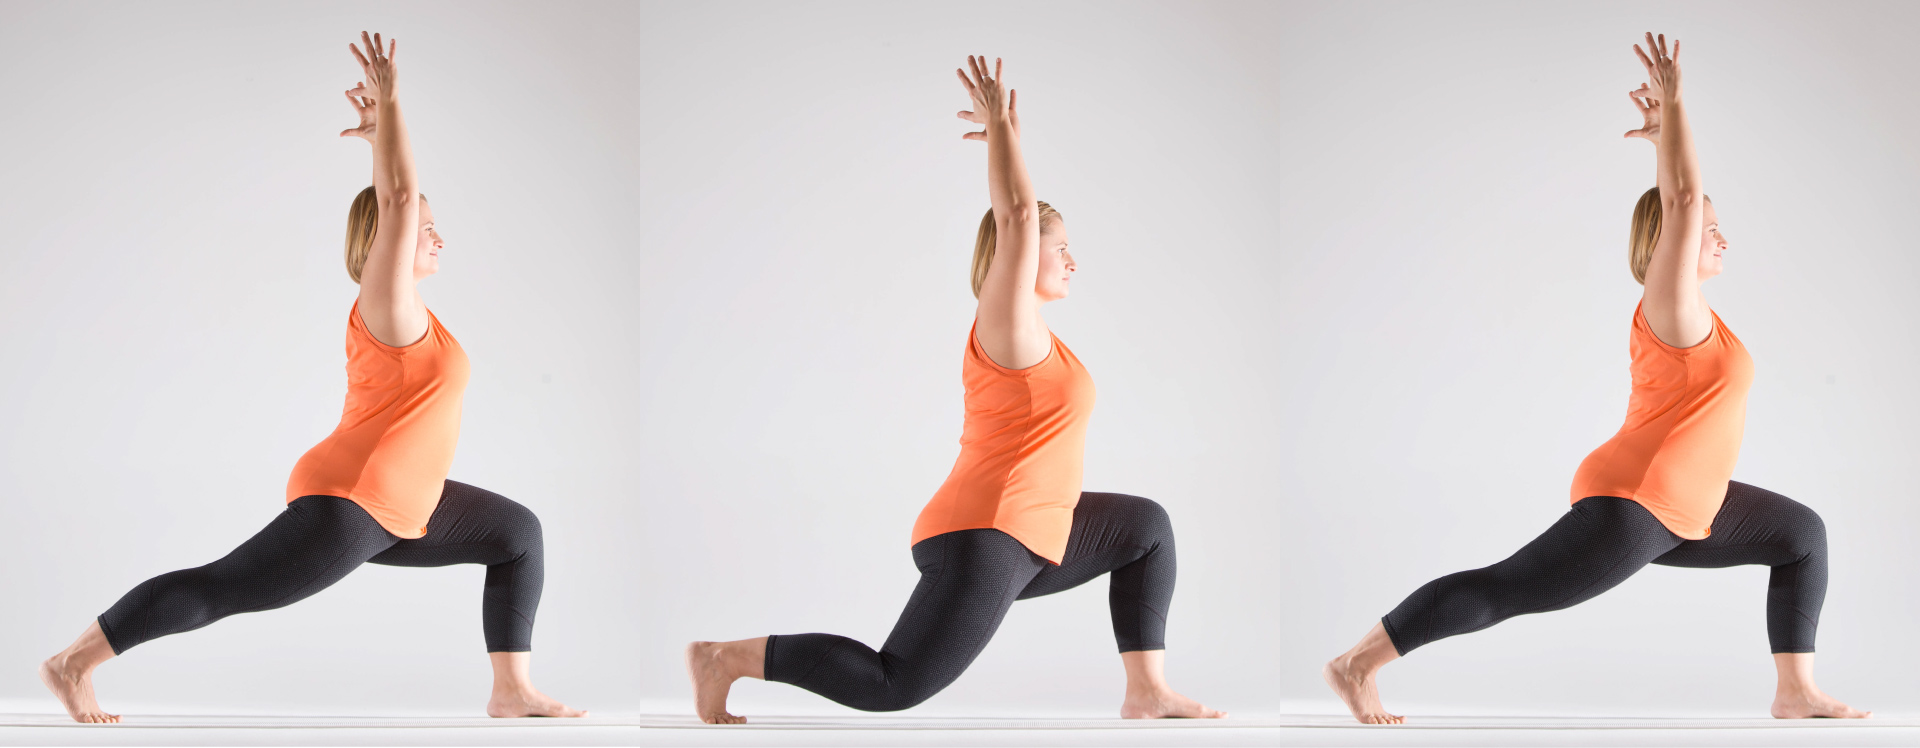 One yoga pose you need to do for strengthening your core muscles | The  Times of India